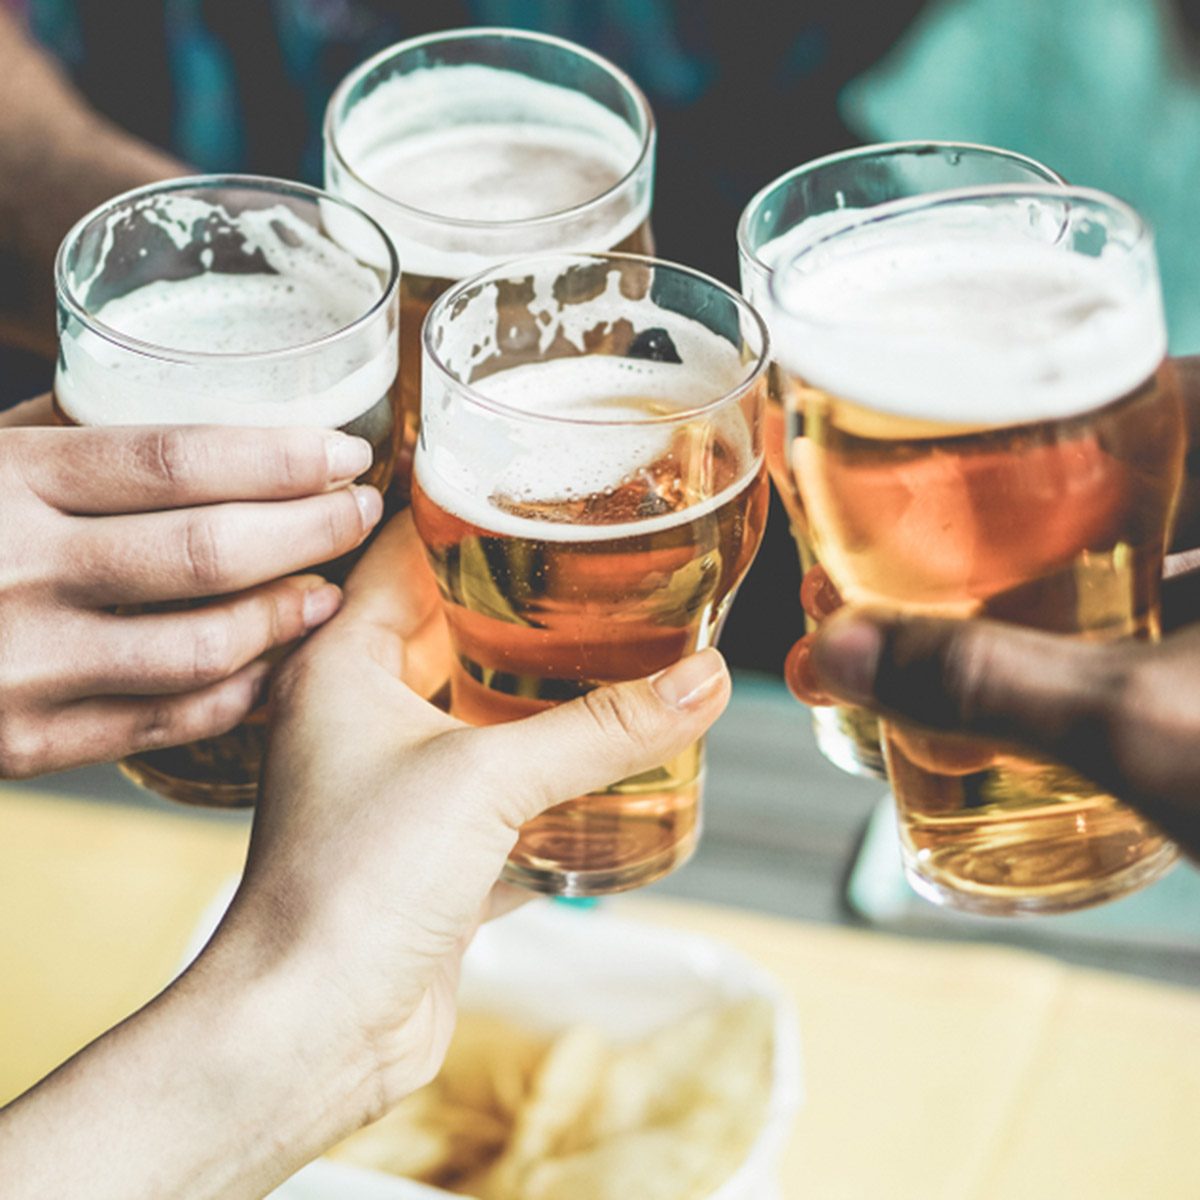 Top 3 Reasons To Drink Beer From A Glass